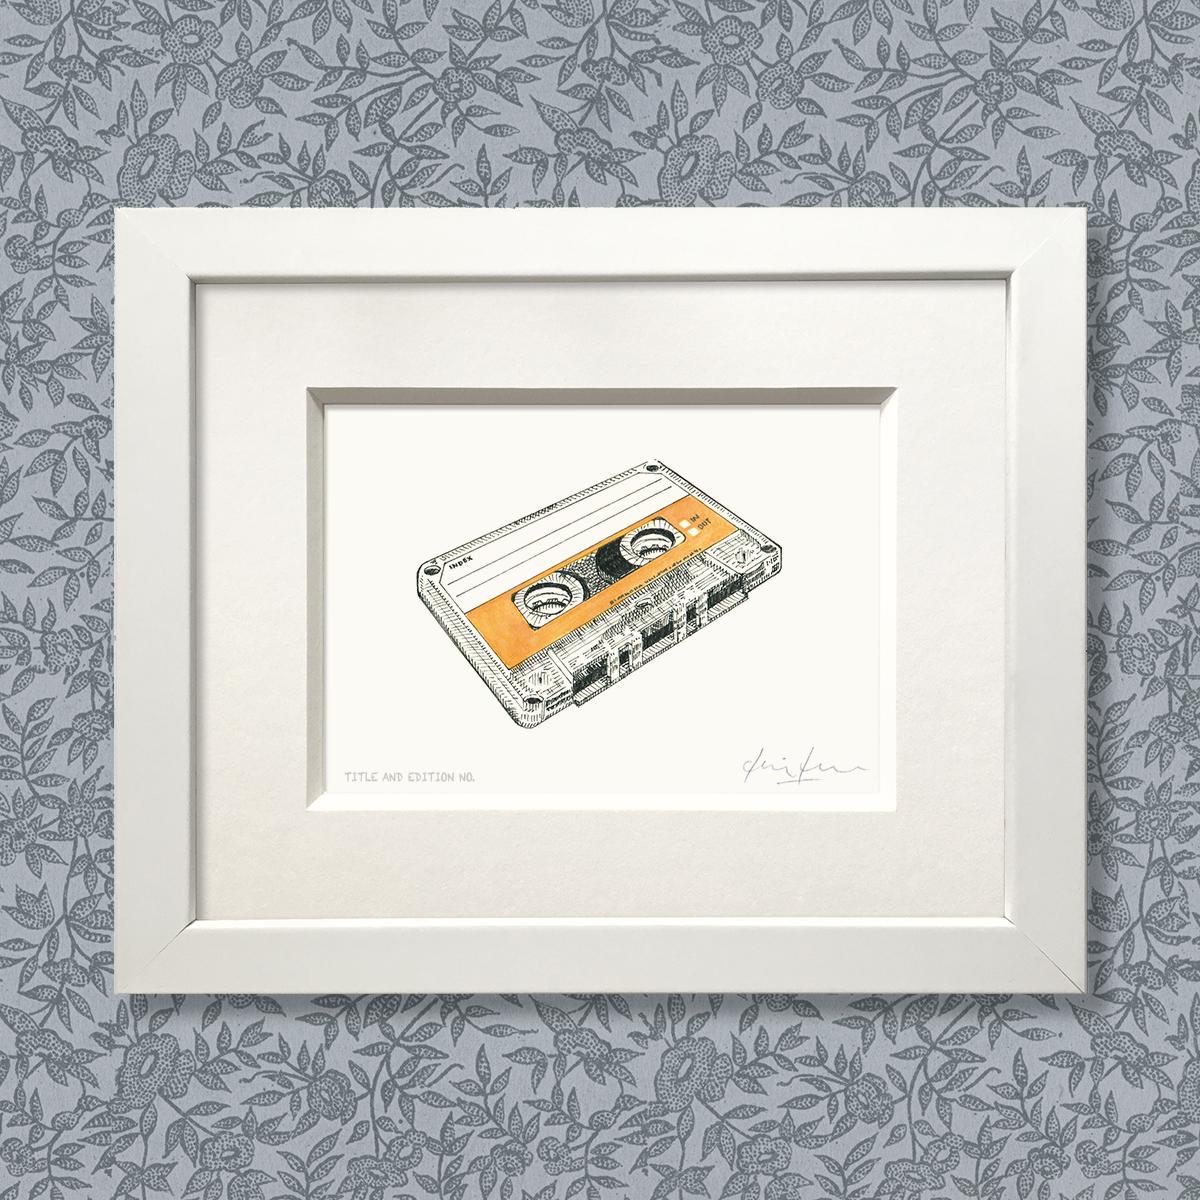 Limited edition print from pen, ink and watercolour sketch of a cassette tape in a white frame